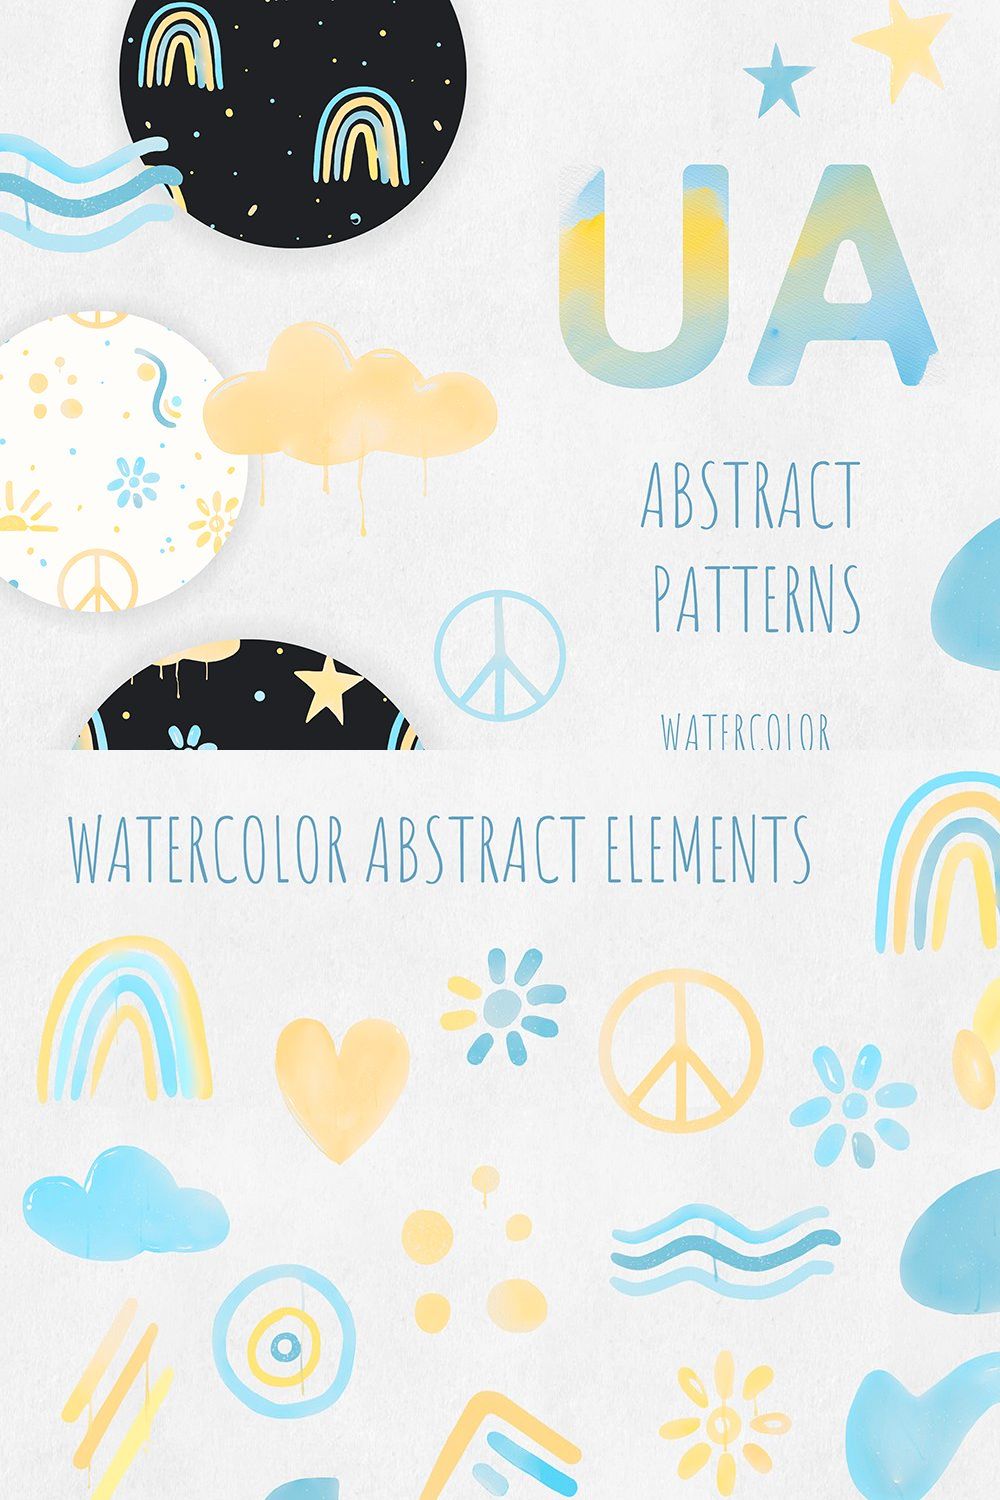 UA Abstract watercolor patterns pinterest preview image.